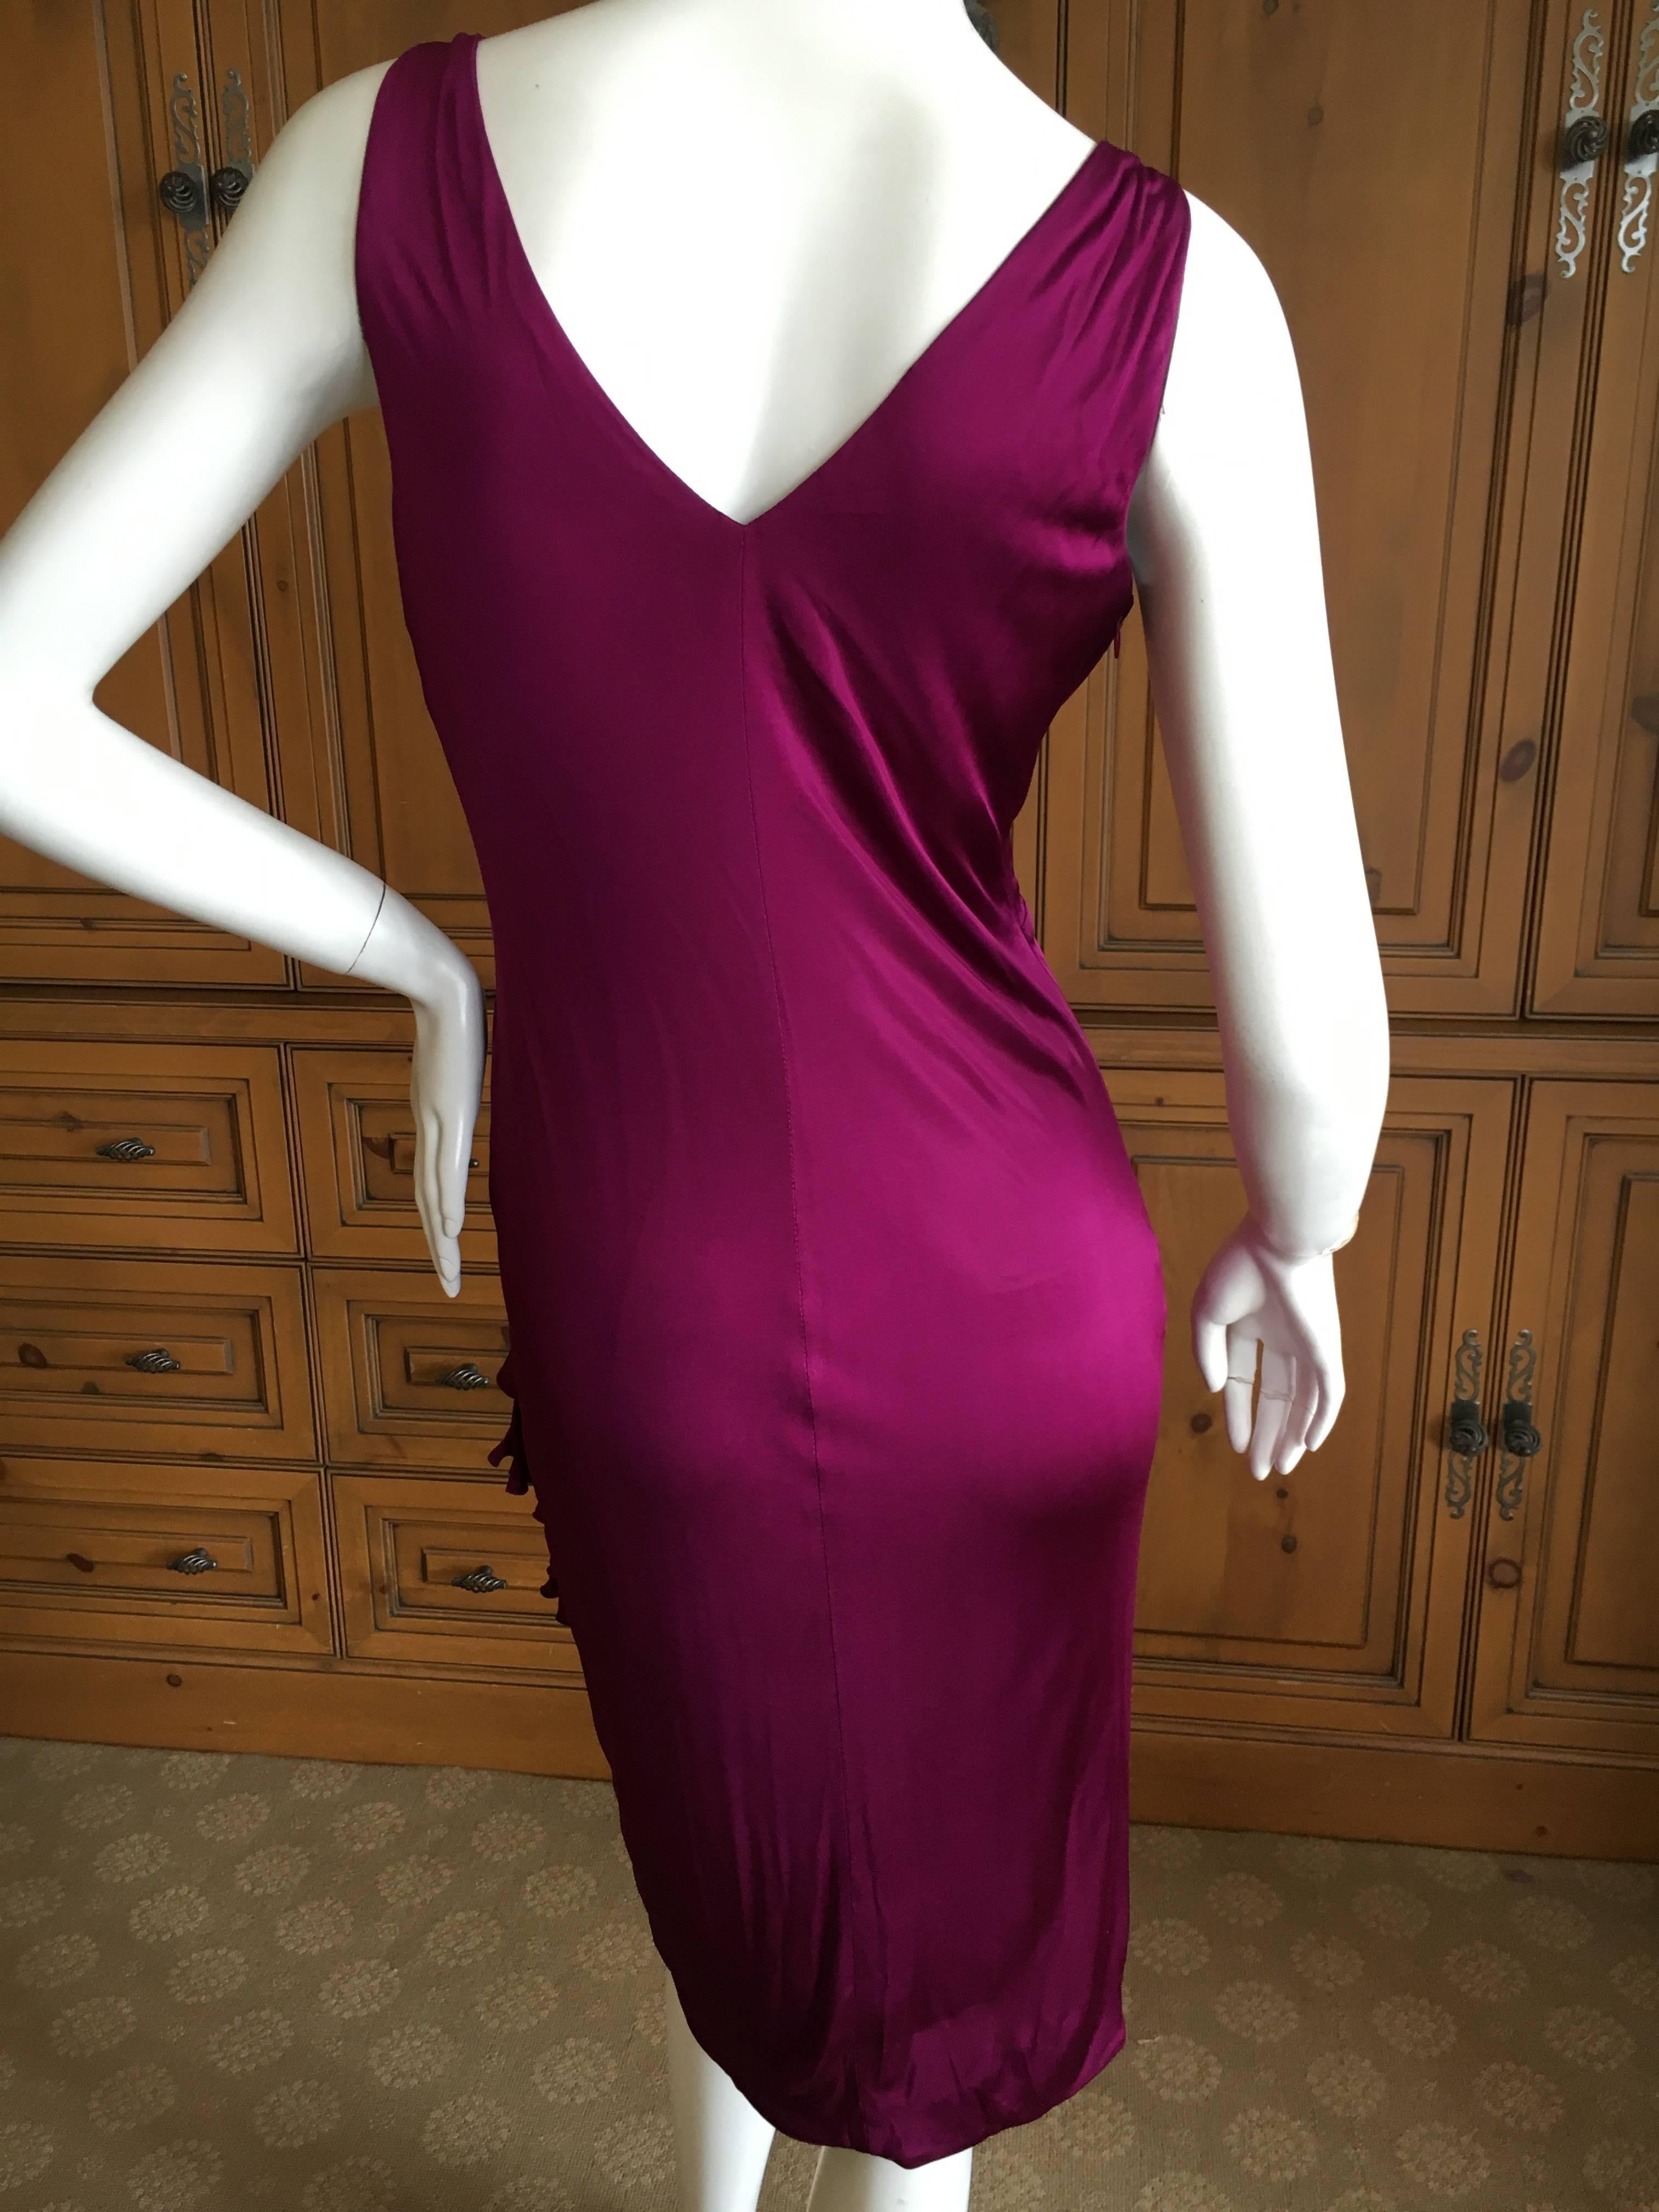 Versace Violet Ruffled Jersey Dress In Excellent Condition For Sale In Cloverdale, CA